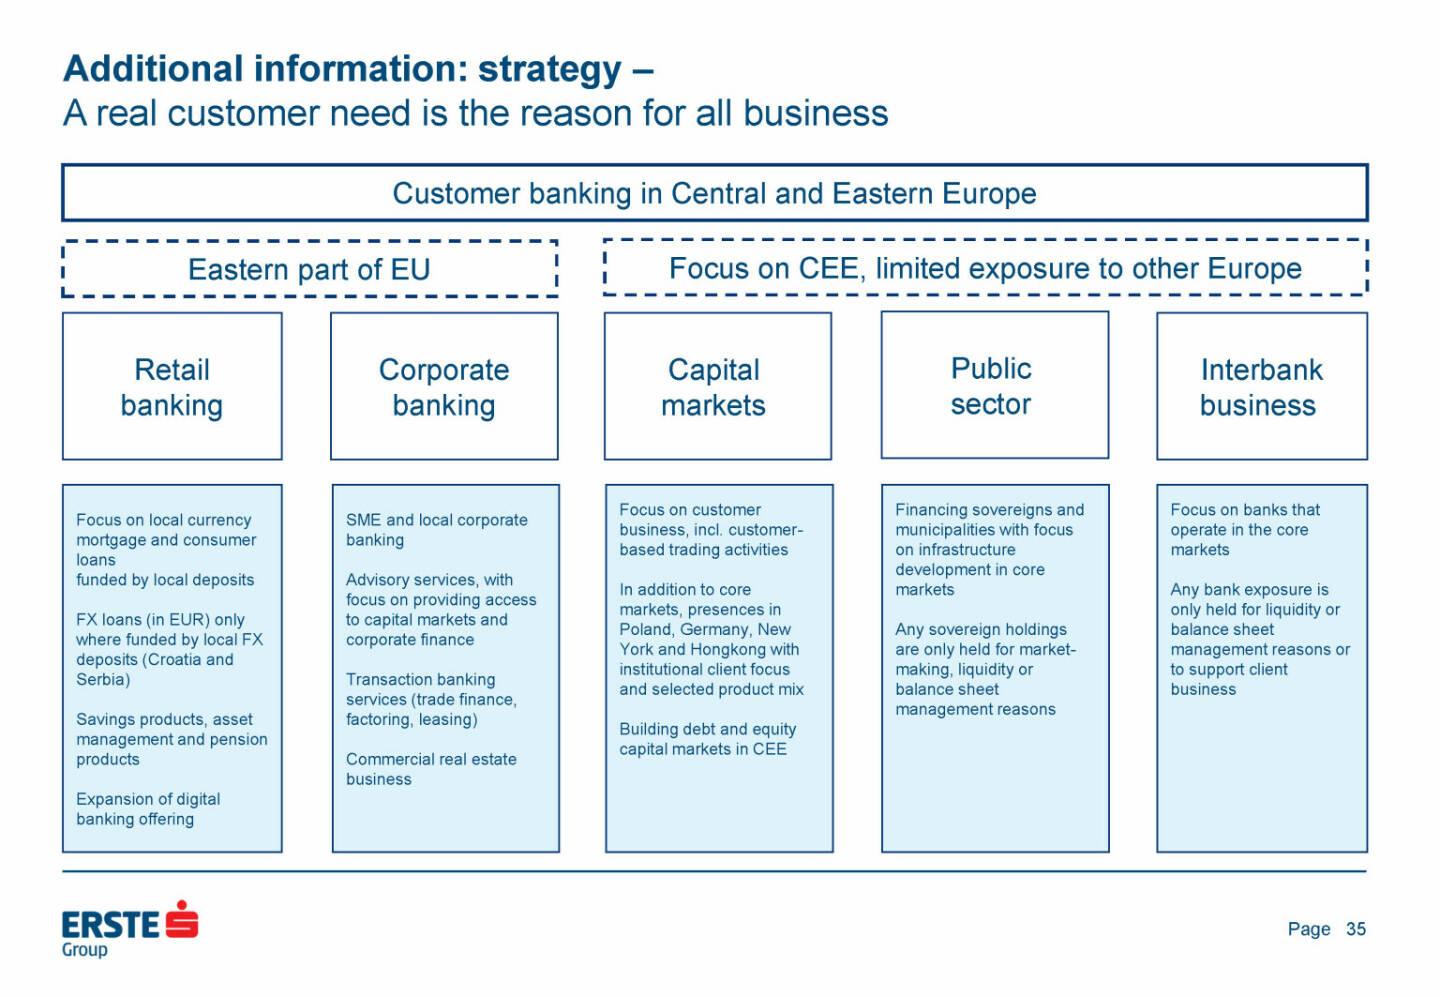 Erste Group - Additional information: strategy